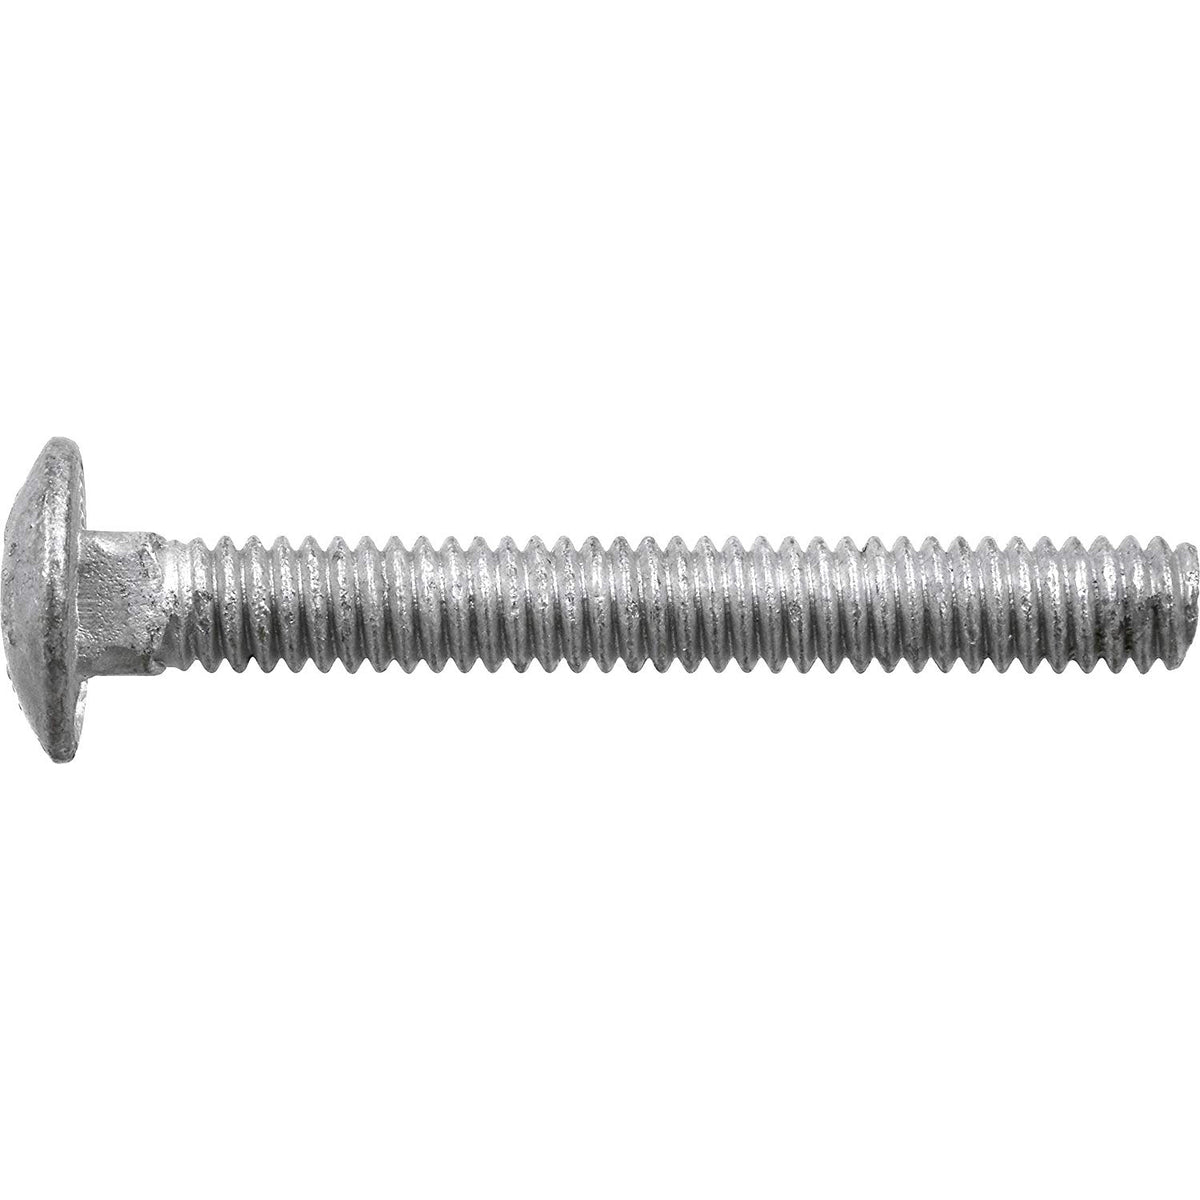 Hillman 812530 Flat Head Carriage Bolts, Galvanized, 1/4" x 6", 100-Count